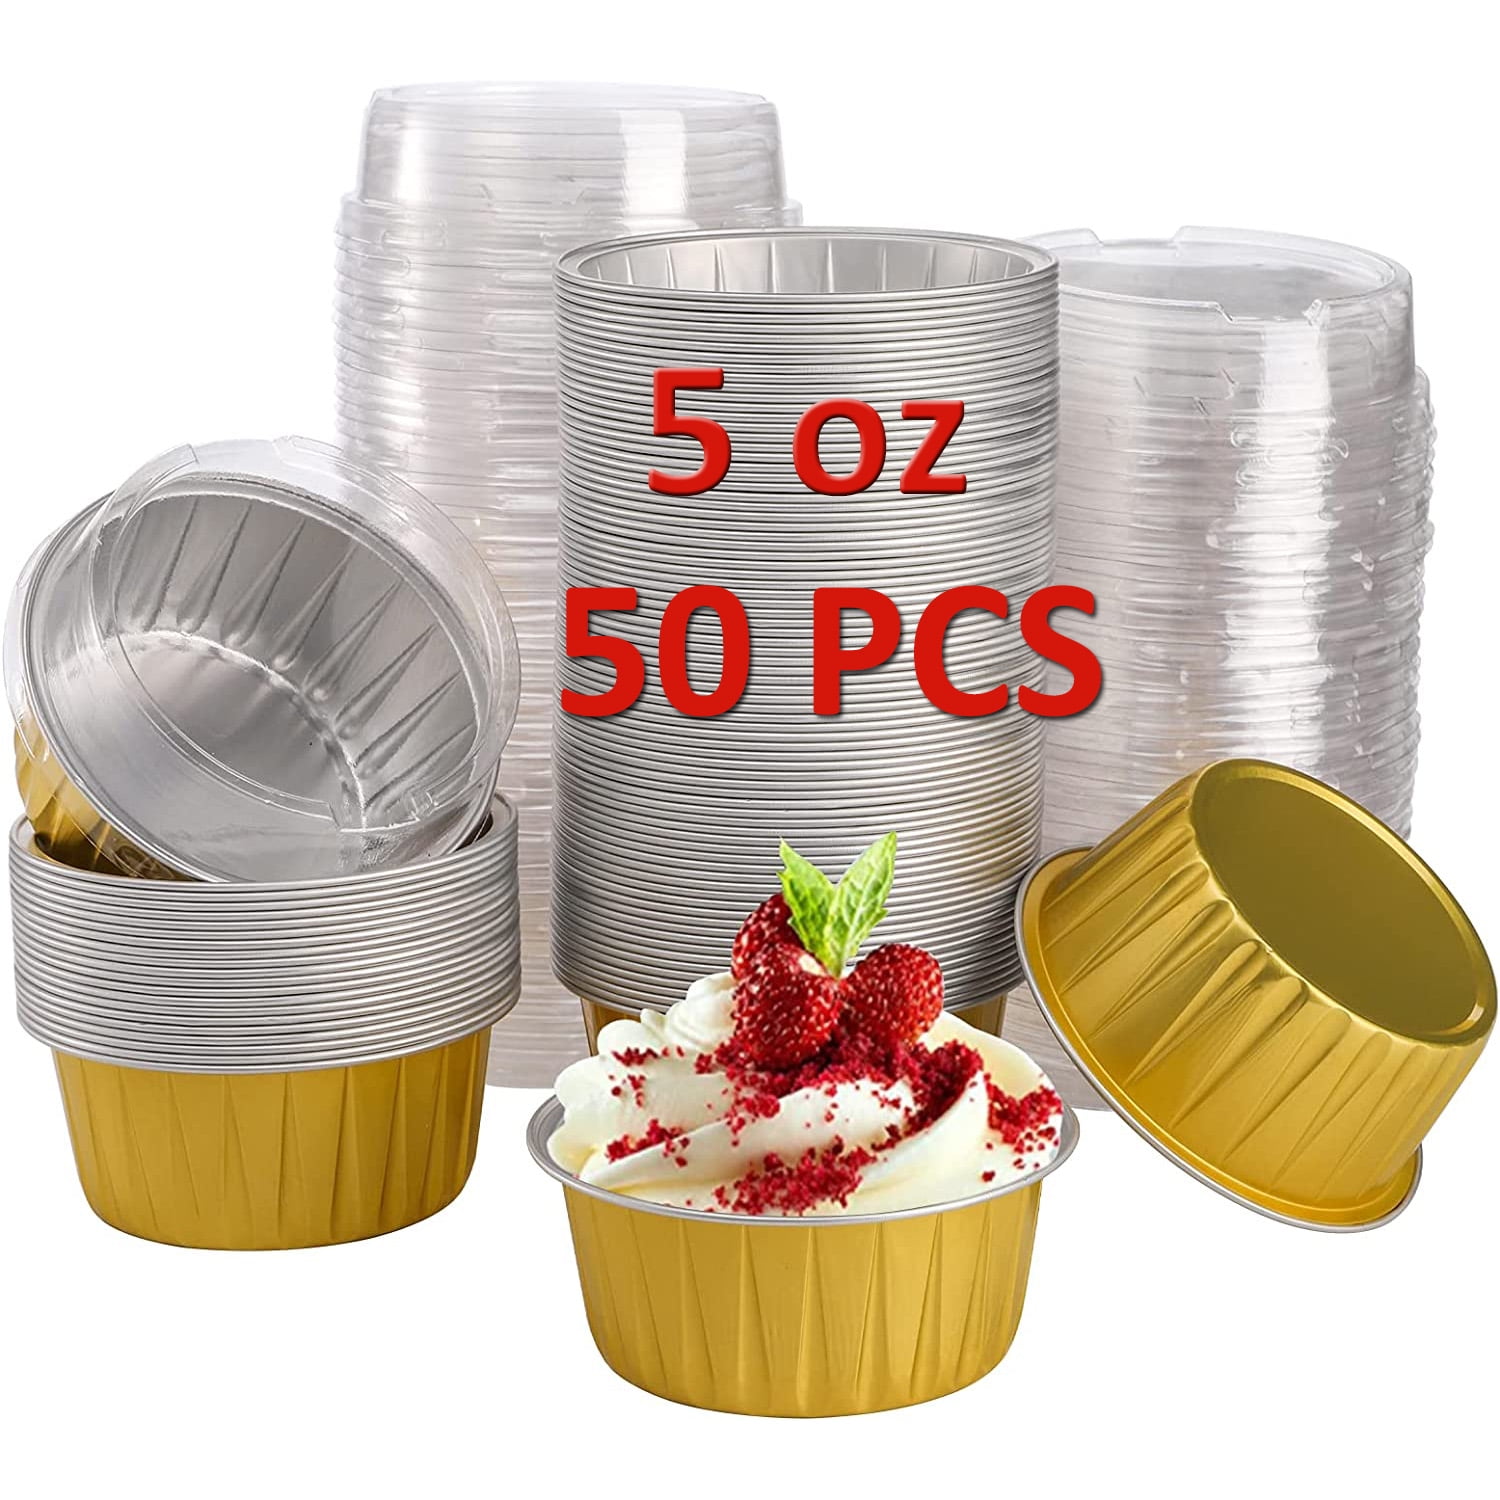 Lt Brown Foil Cupcake Liners qty 50 Brown Foil Baking Cups, Brown